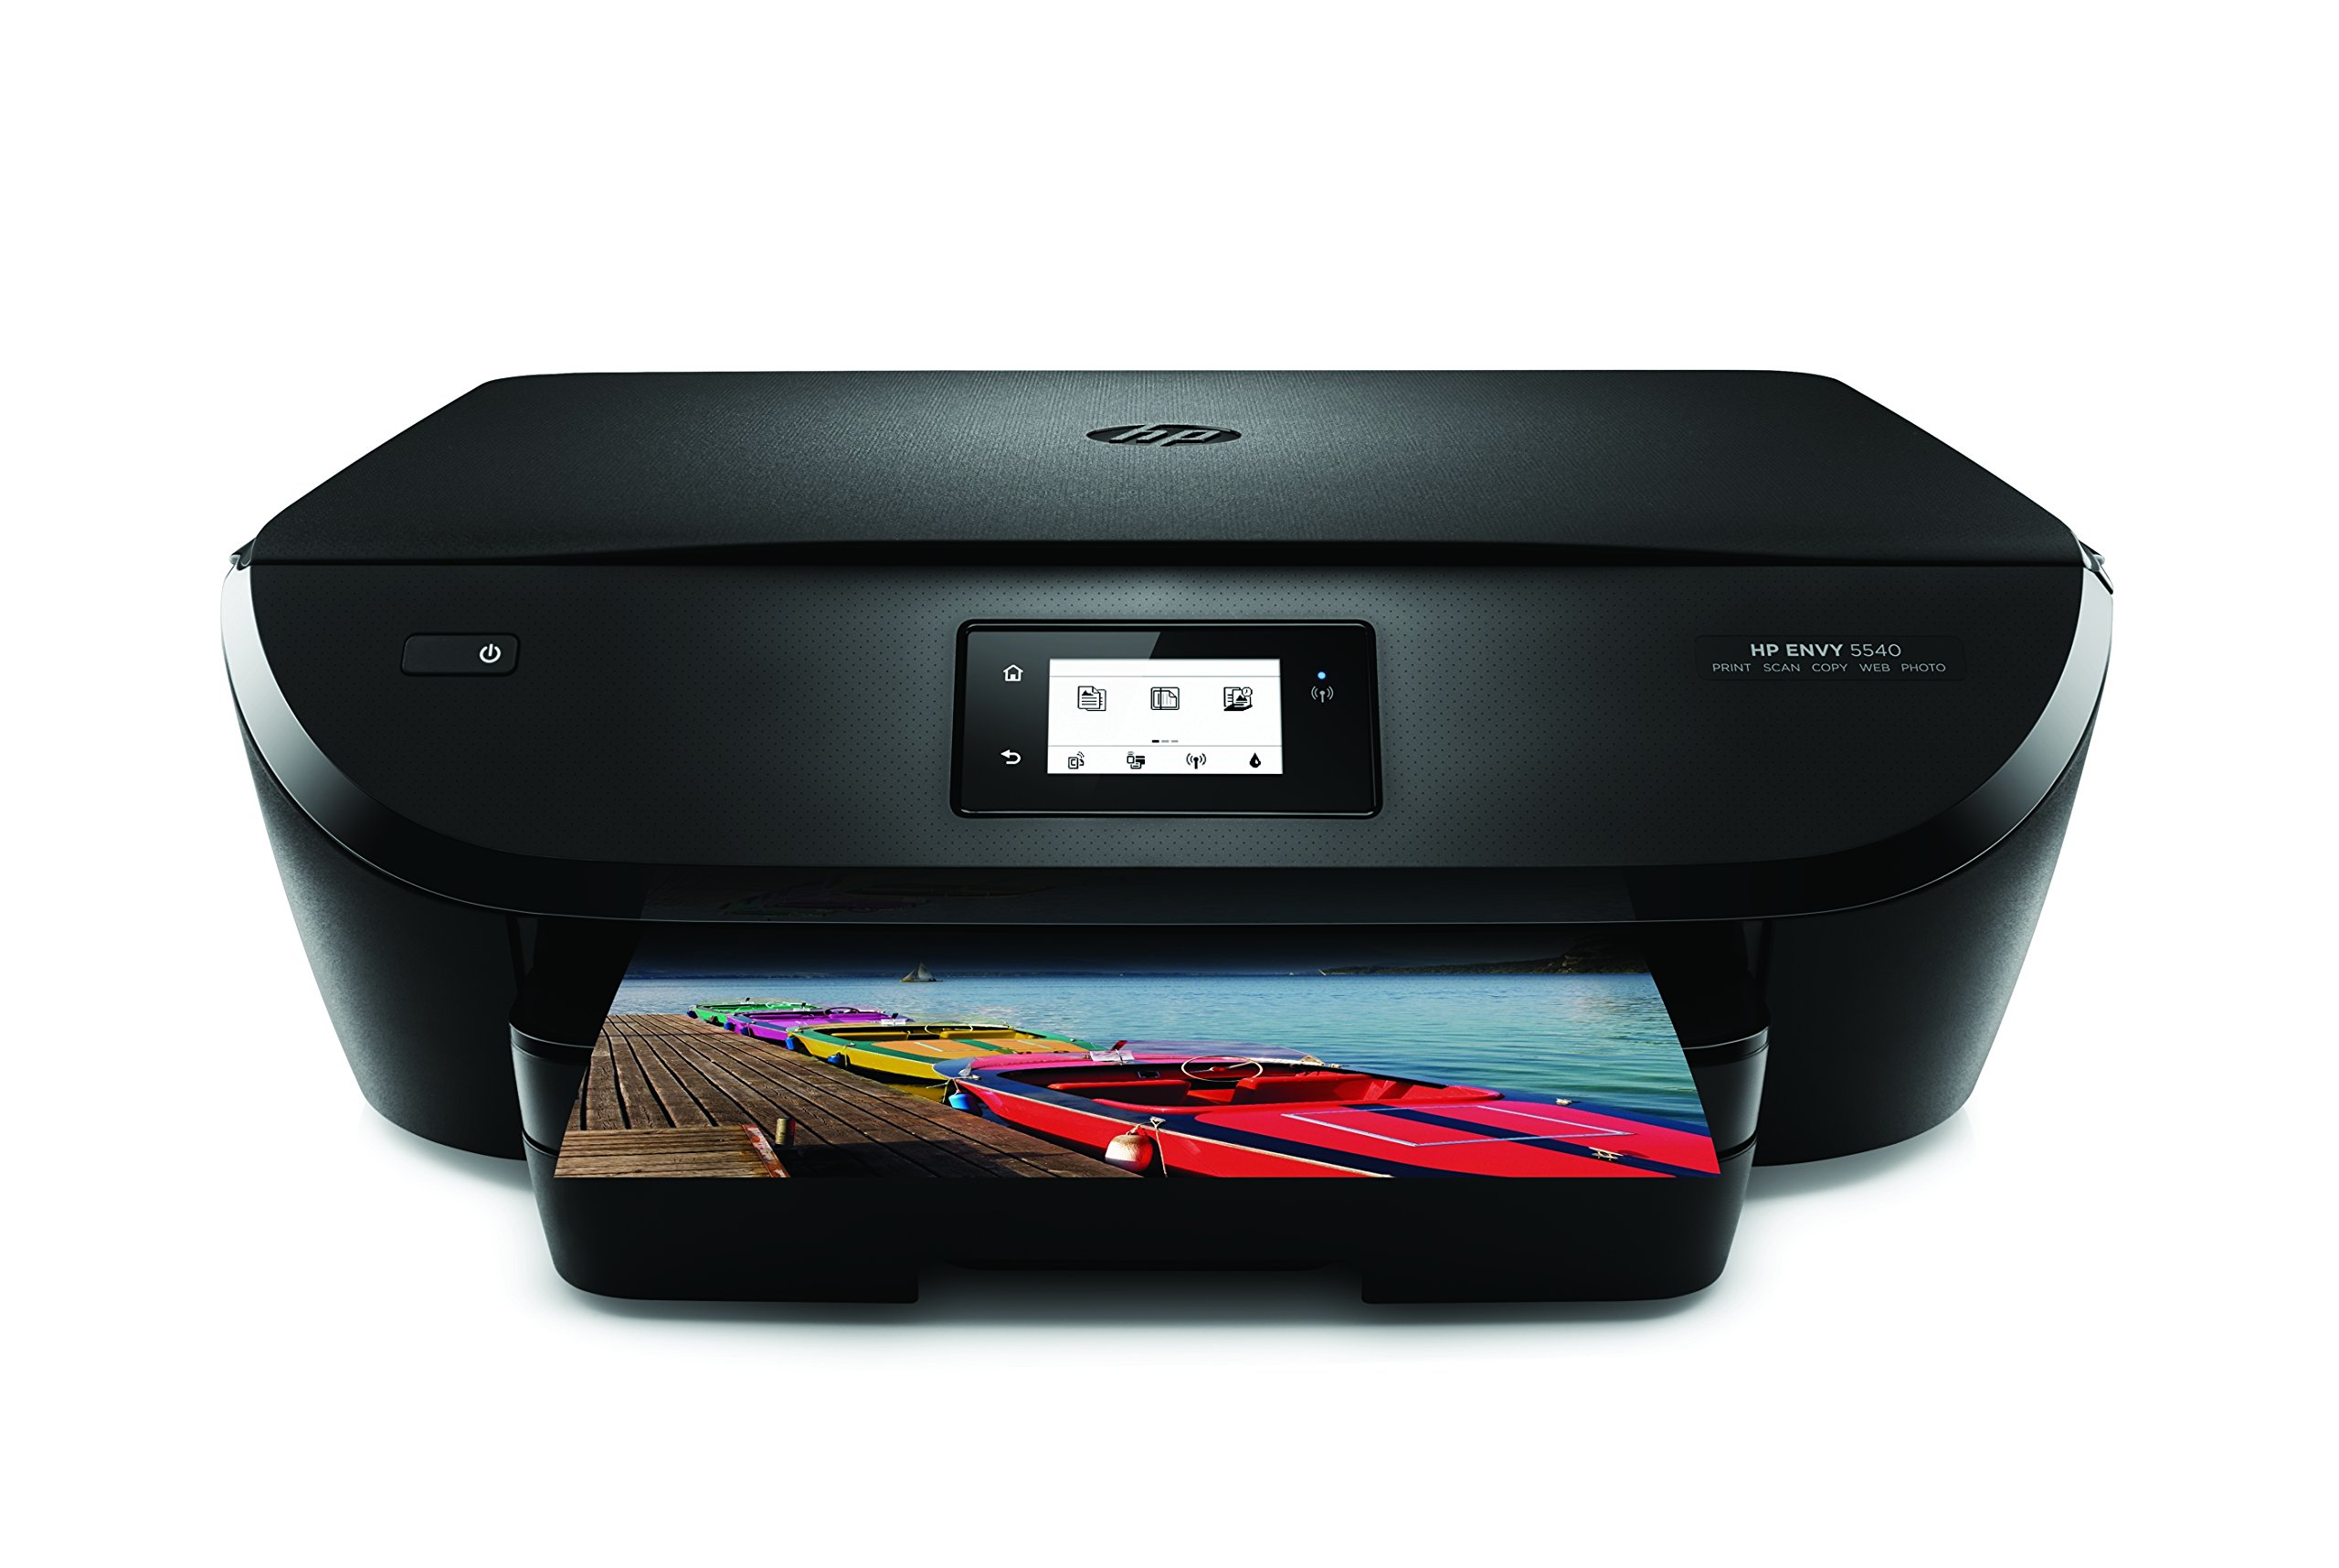 ENVY 5548 All-in-One Printer